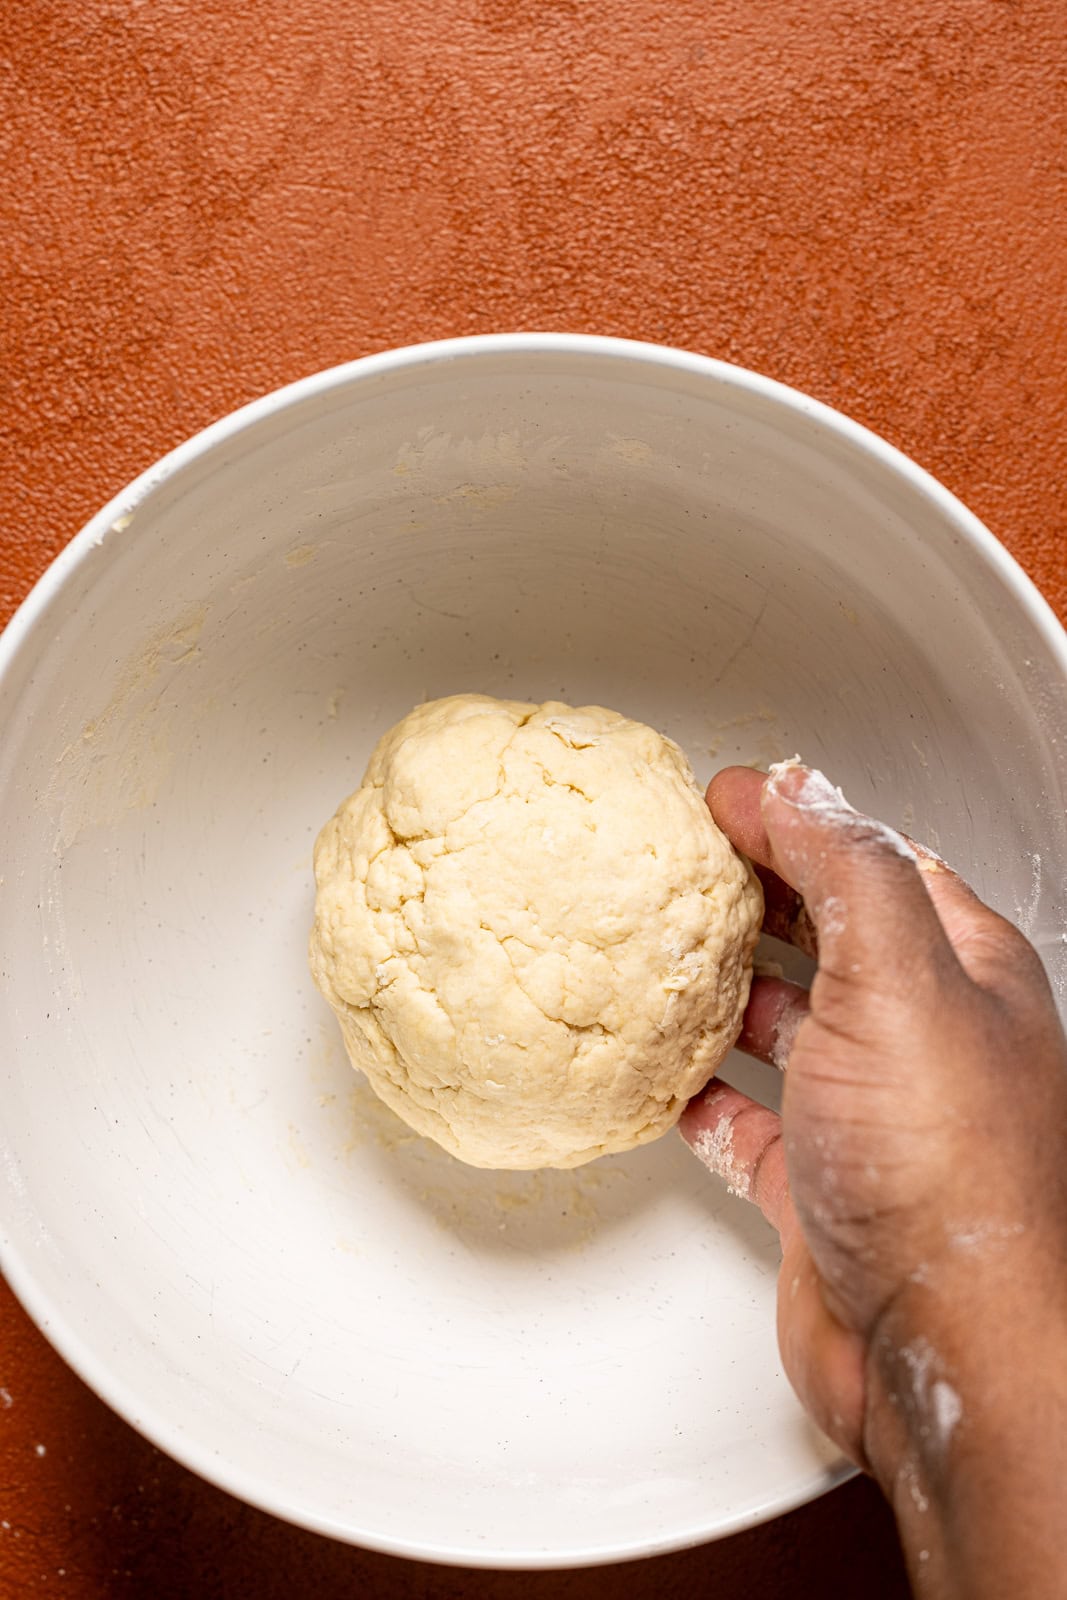 Dough being held in a white bowl.